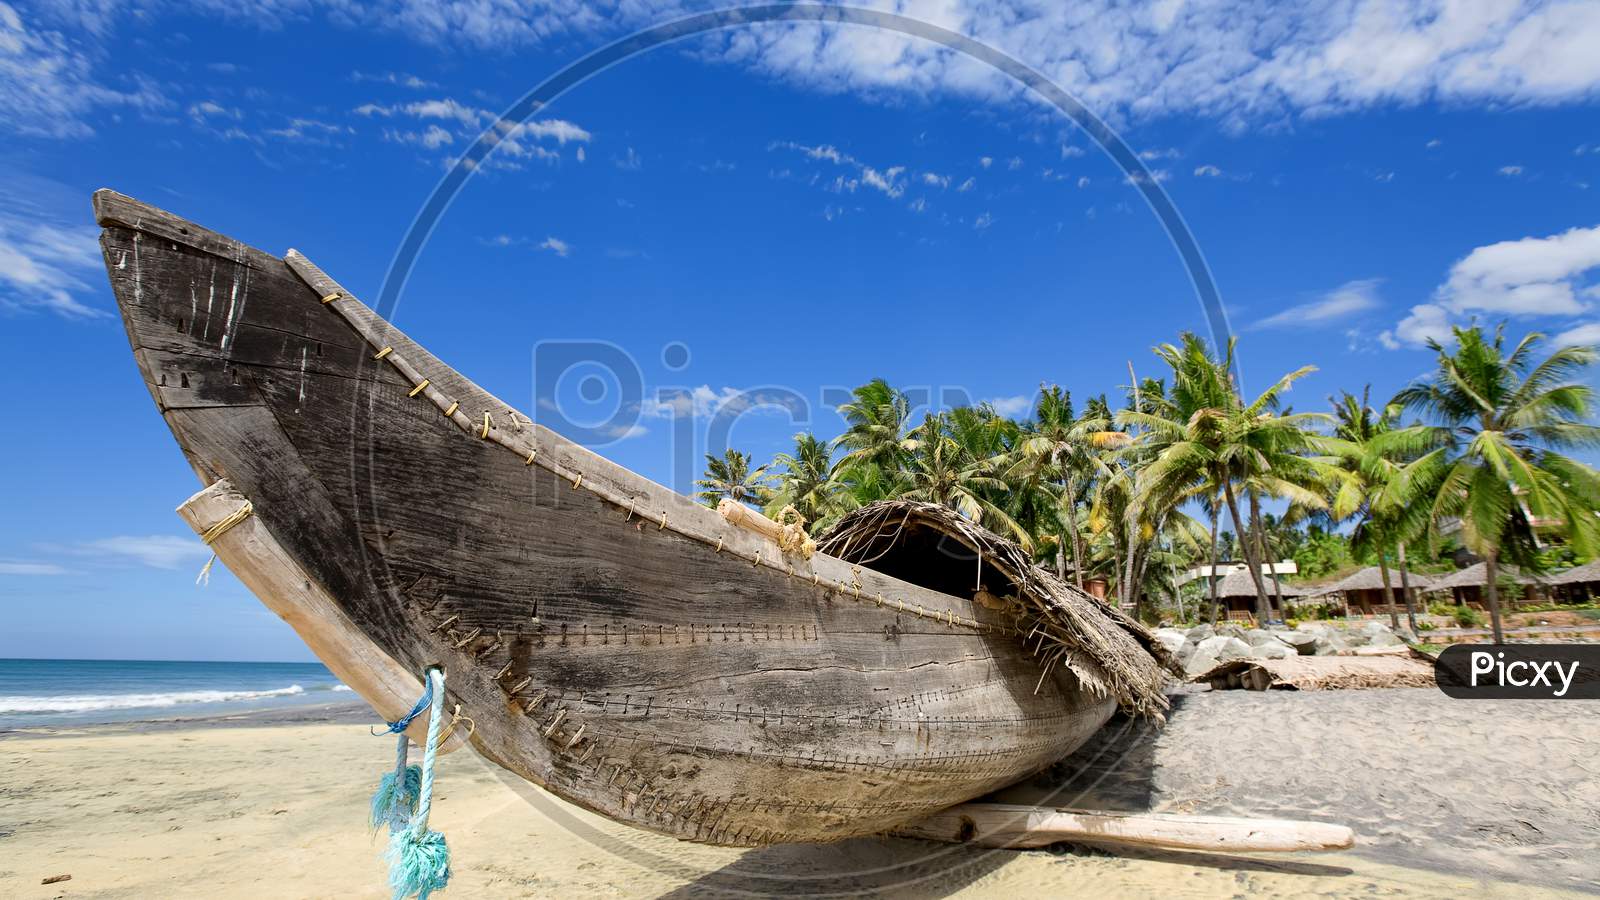 A modern wooden boat near the sea beach on dry sand with palm trees and blue sky